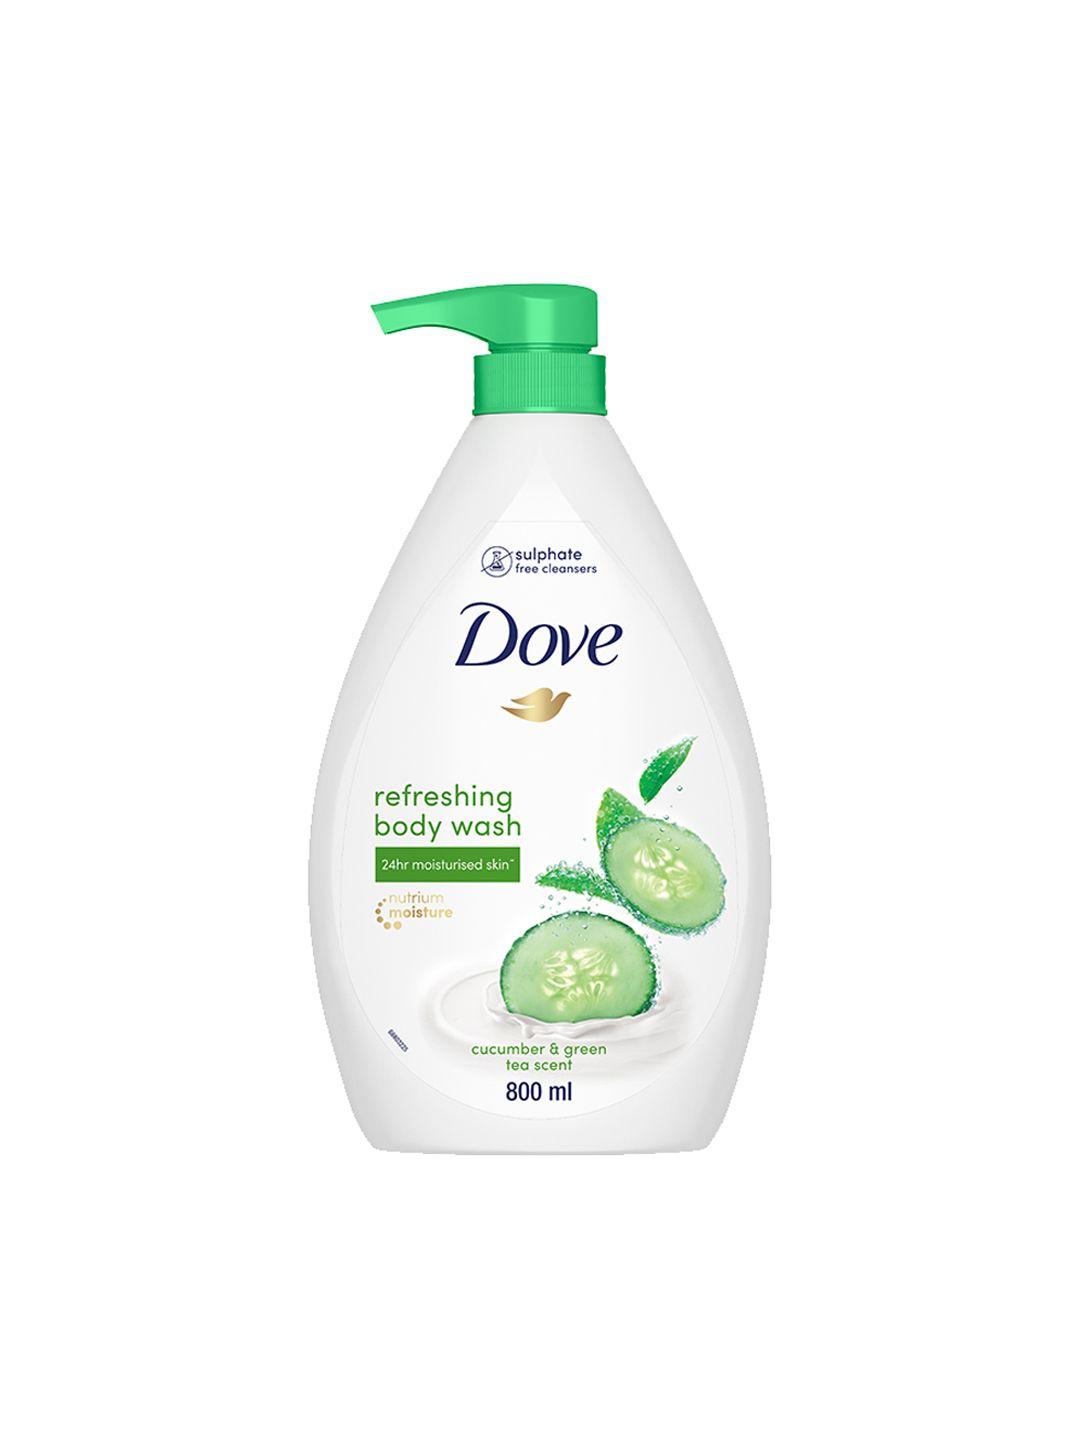 dove refreshing body wash with cucumber & green tea scent - 800ml